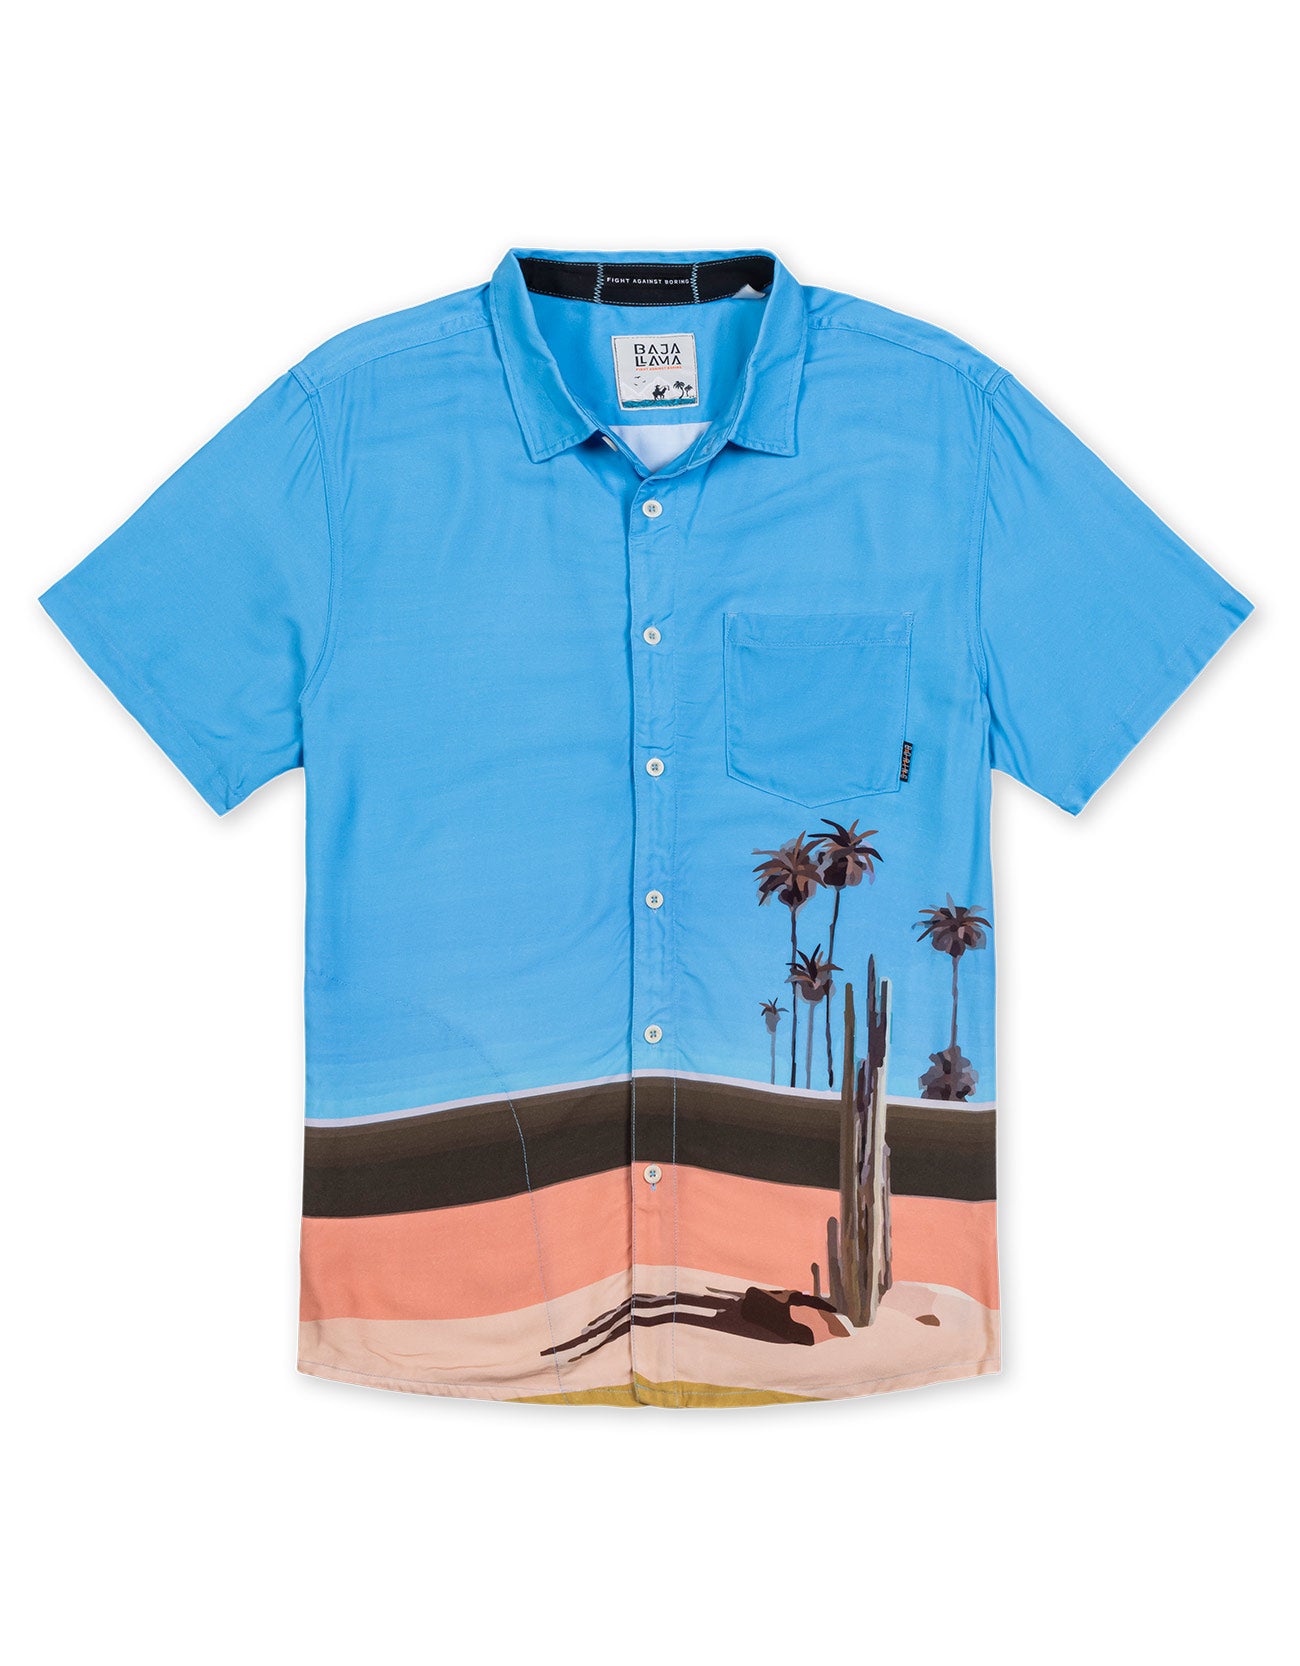 Blue retro style button up with cactus and palm tree digital print